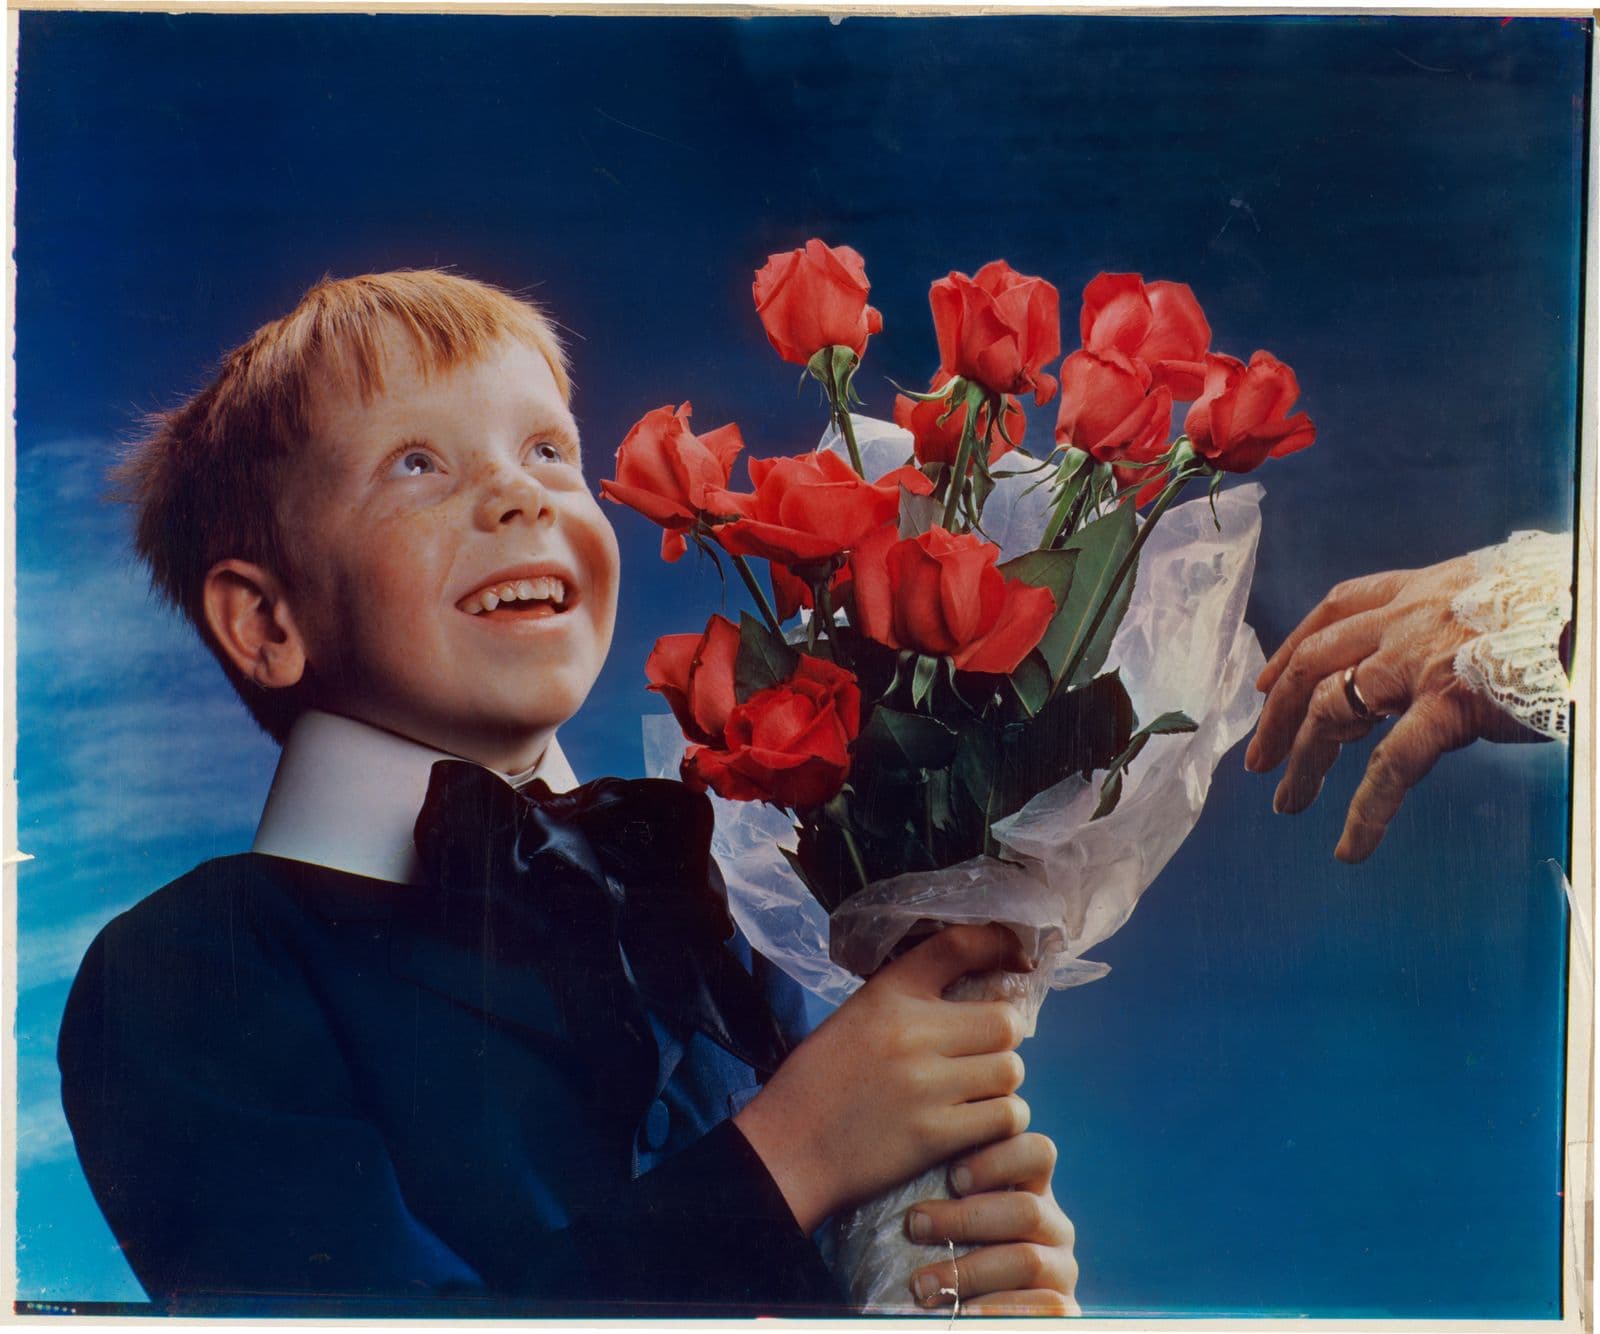 Picture of a young redheaded offering a bouquet of red roses to an unknown figure whose elderly hands are shown in the frame.